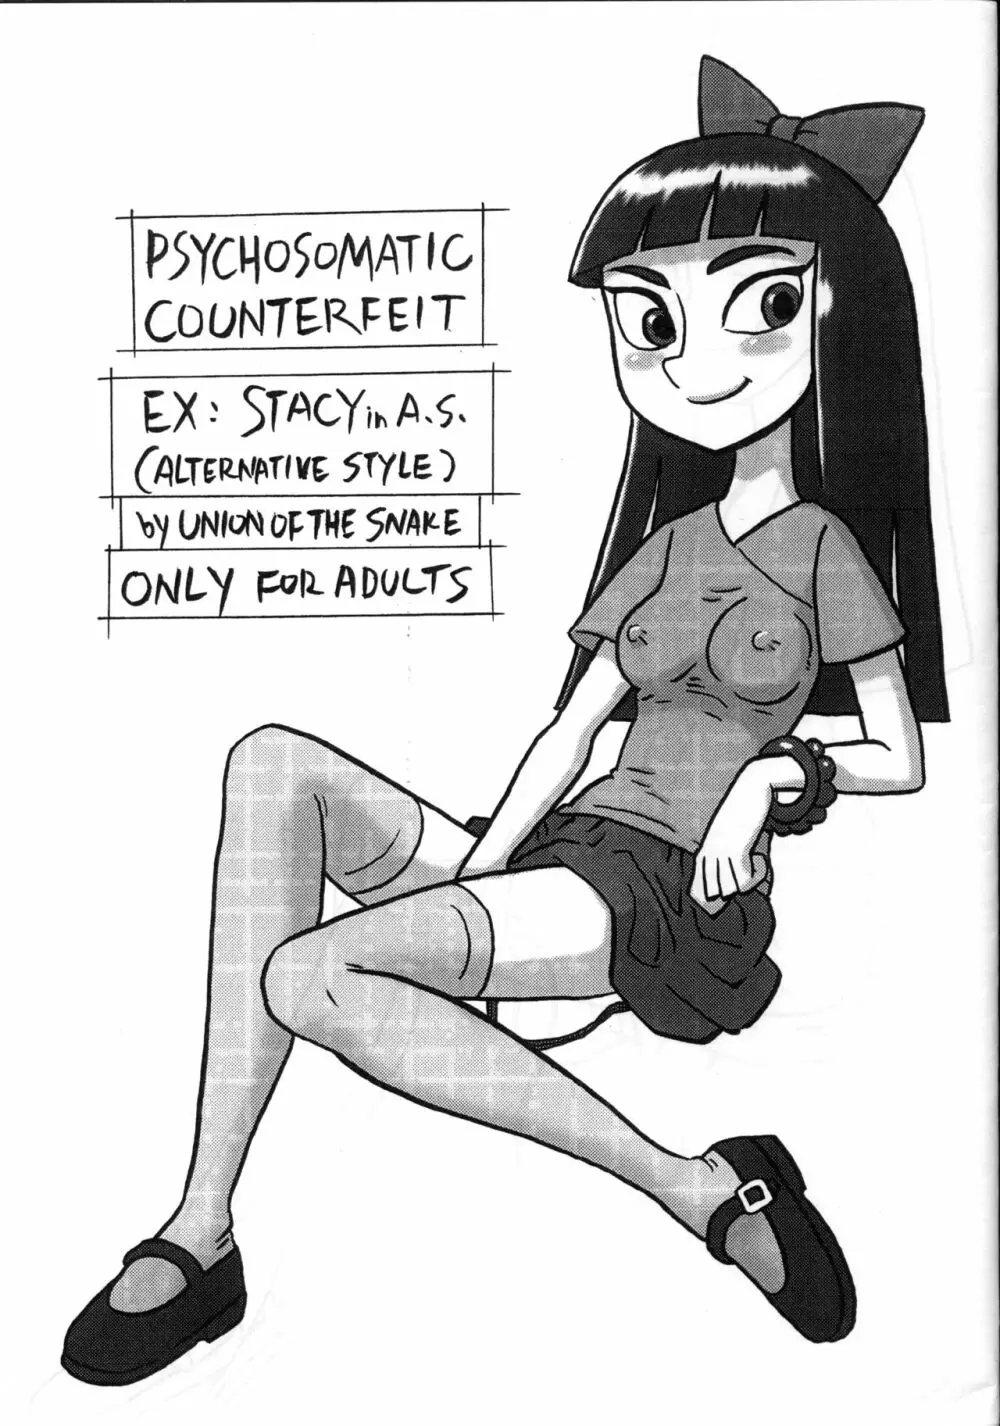 Psychosomatic Counterfeit Ex: Stacy in A.S.